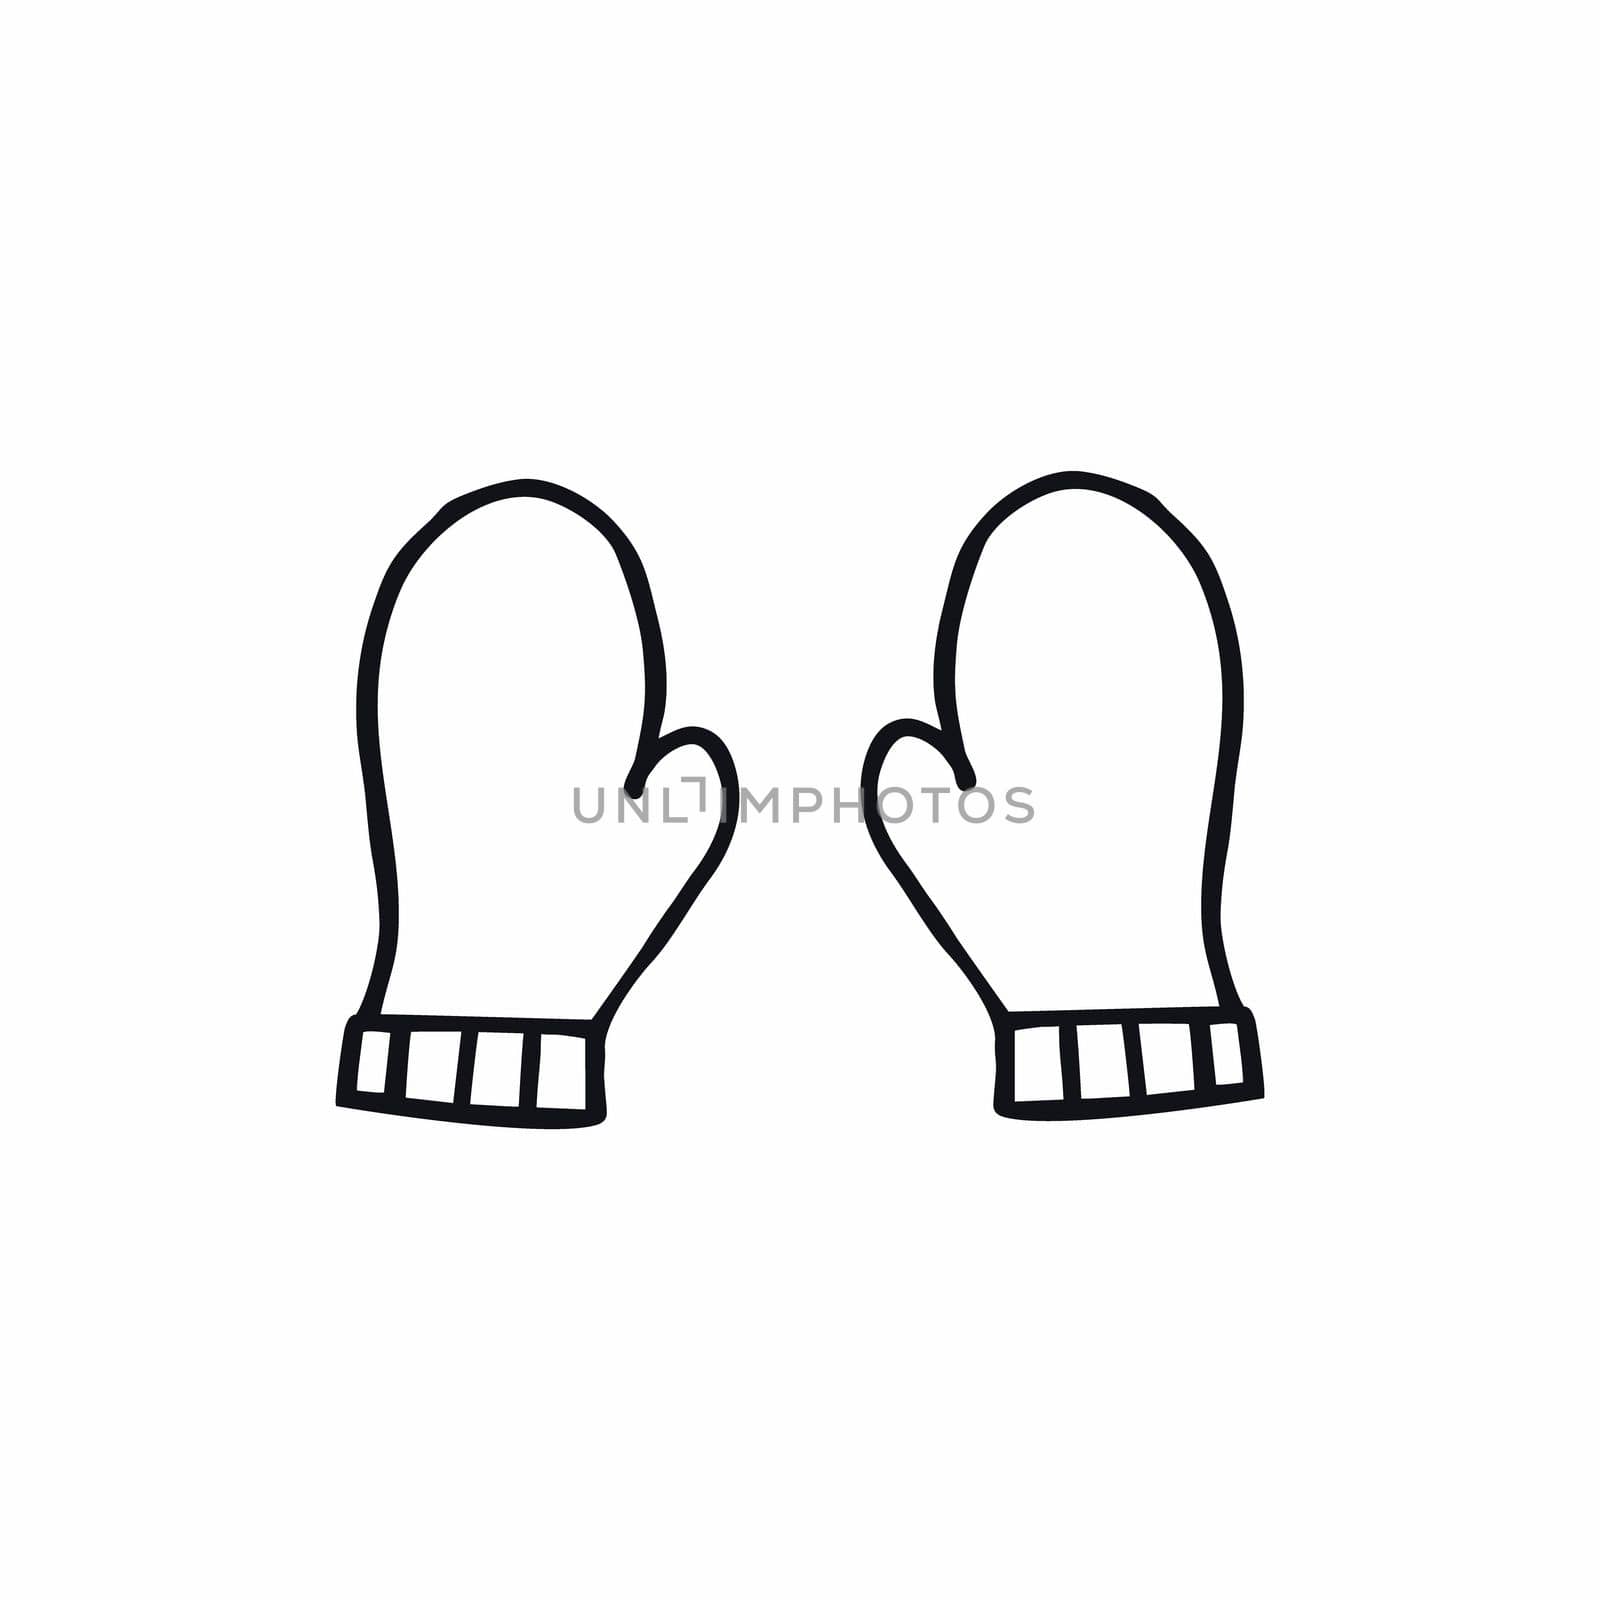 Black contour illustration of children's mittens on a white background. Doodle drawing sketch by hand. Mittens isolated on a white background. Winter clothing for children. Vector icon.